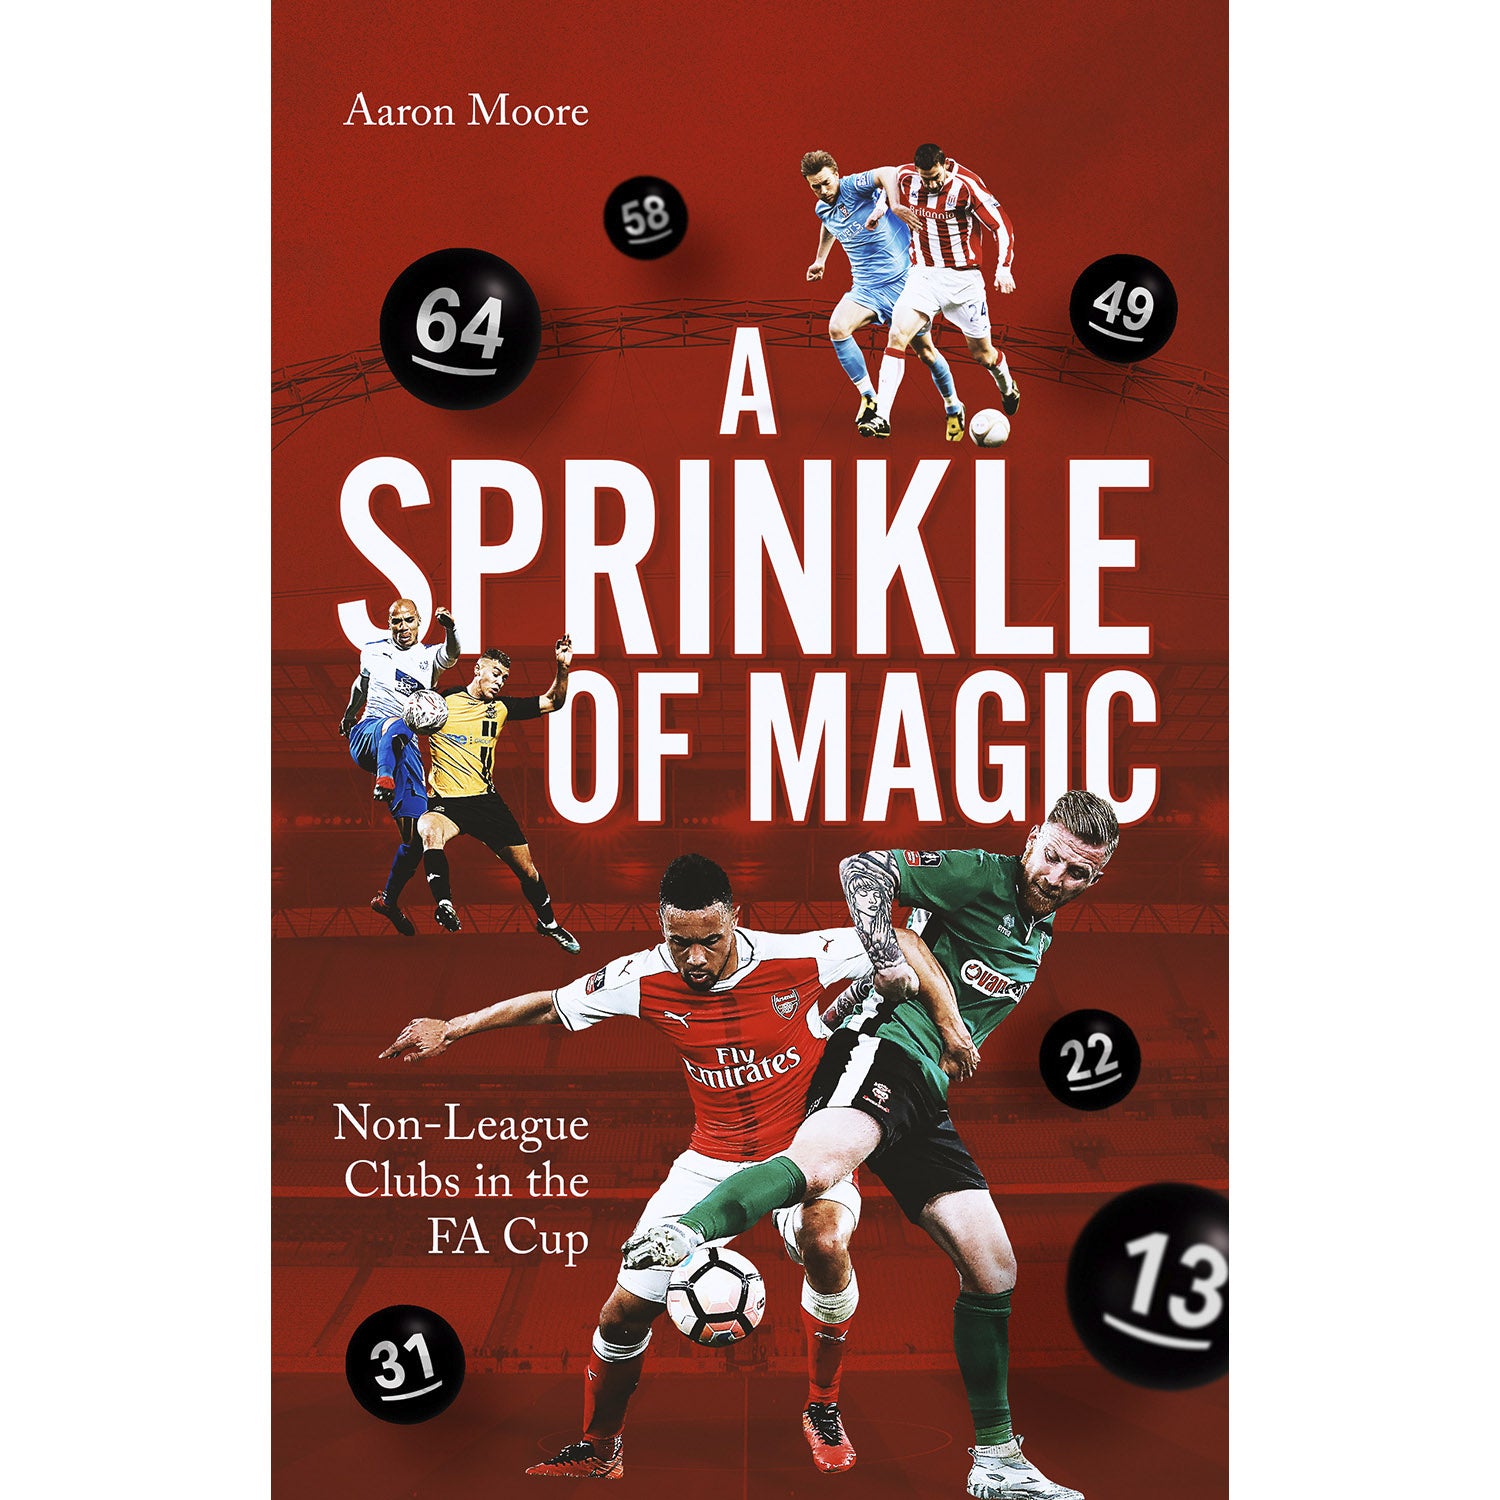 A Sprinkle of Magic – Non-League Clubs in the F.A. Cup